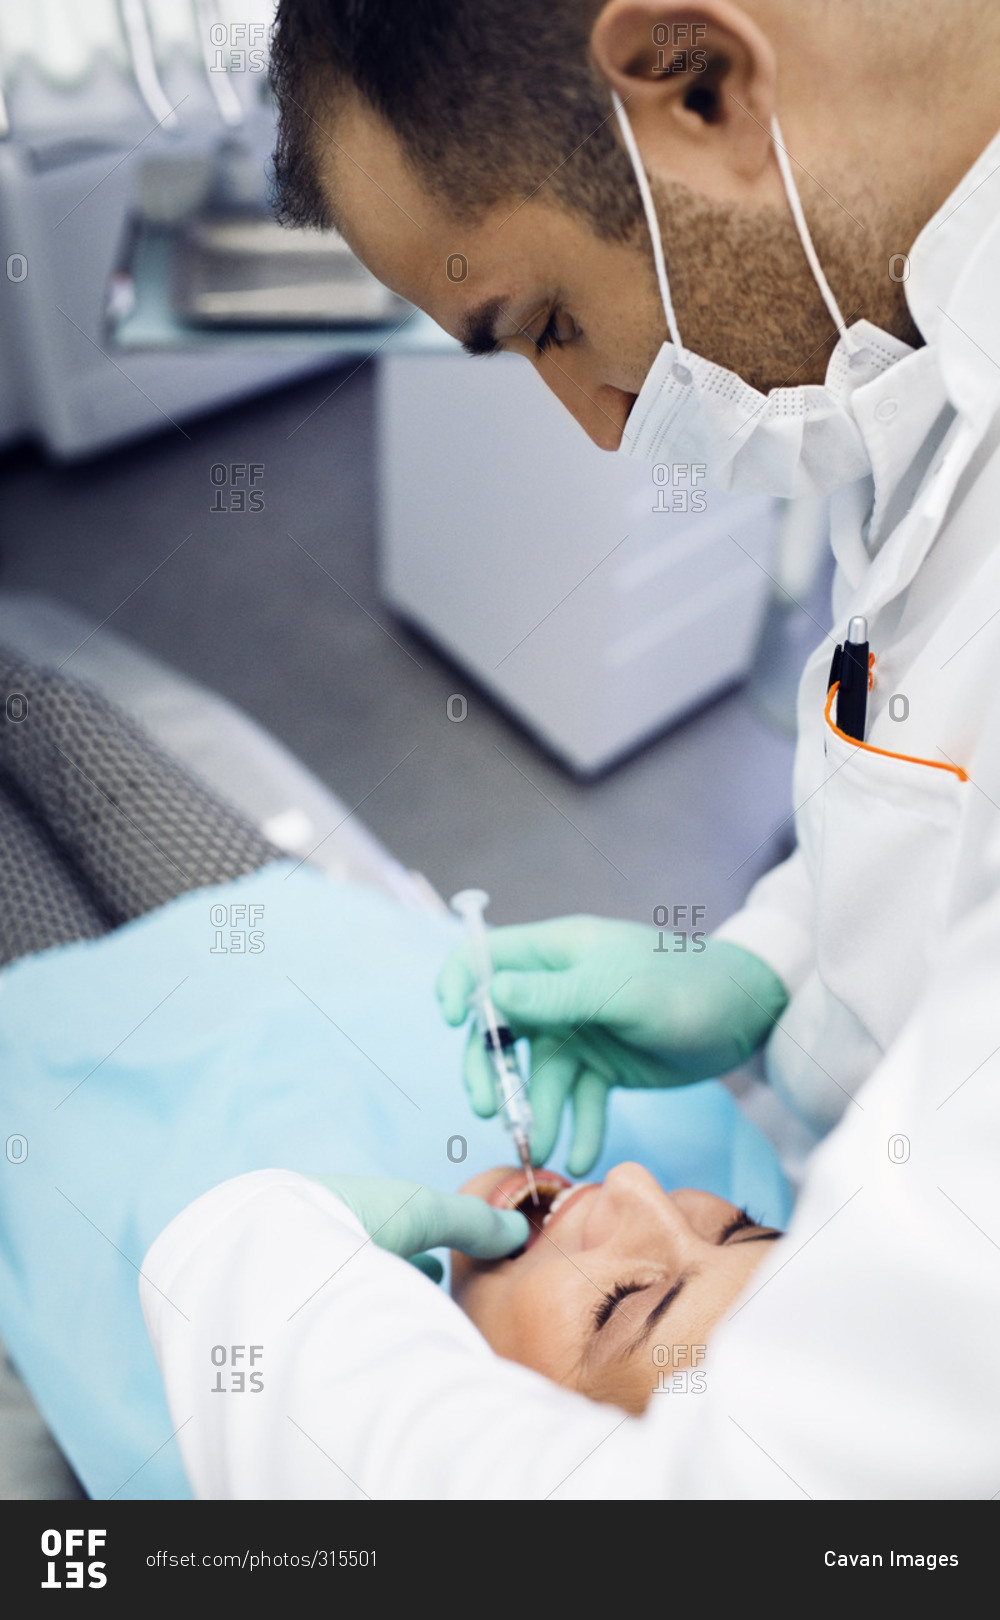 Dentist giving a patient an injection